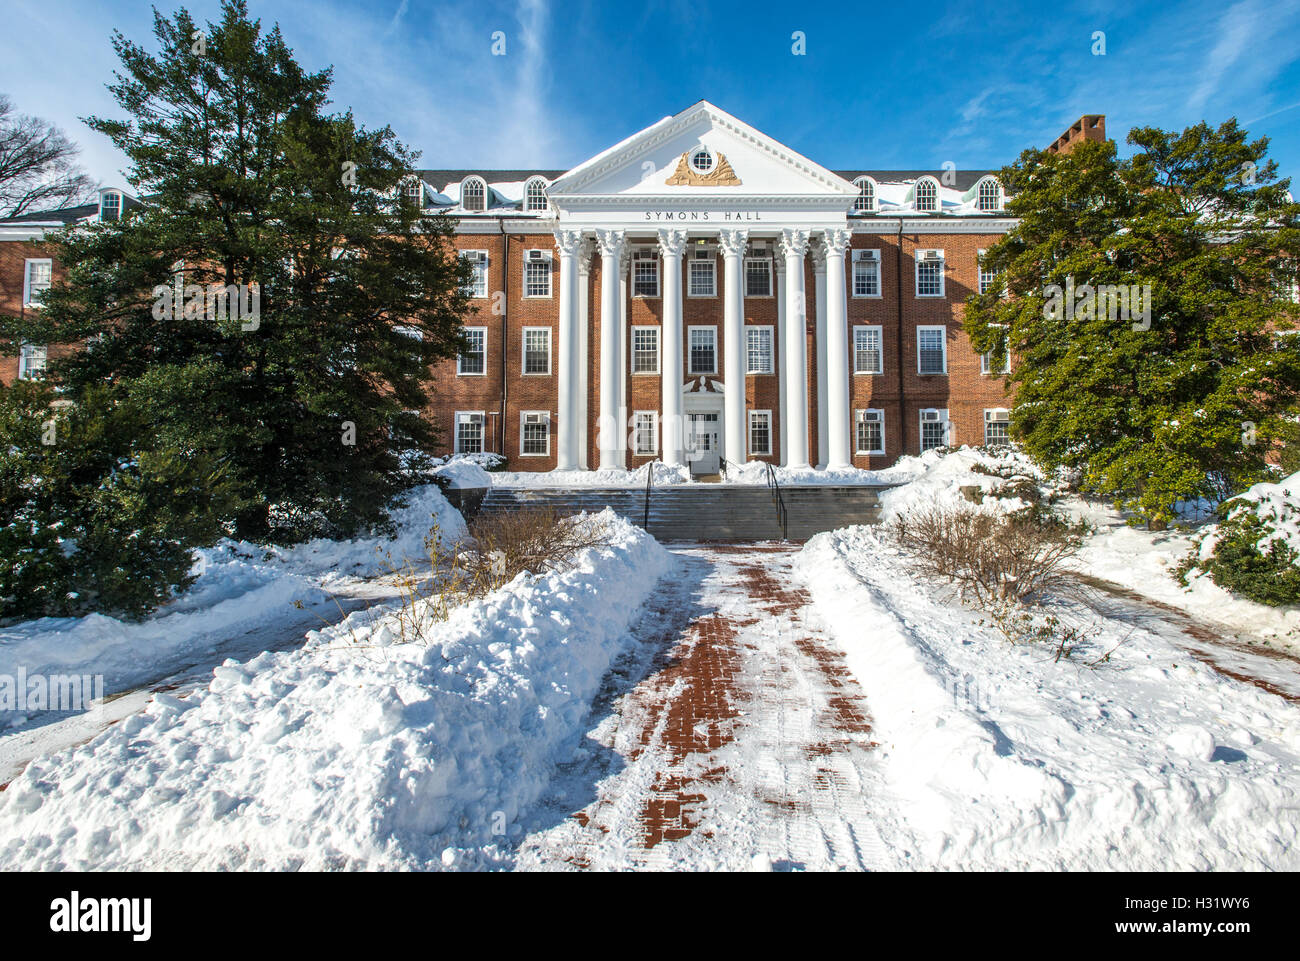 Snow On Campus At The University Of Maryland College Park Stock Photo Alamy